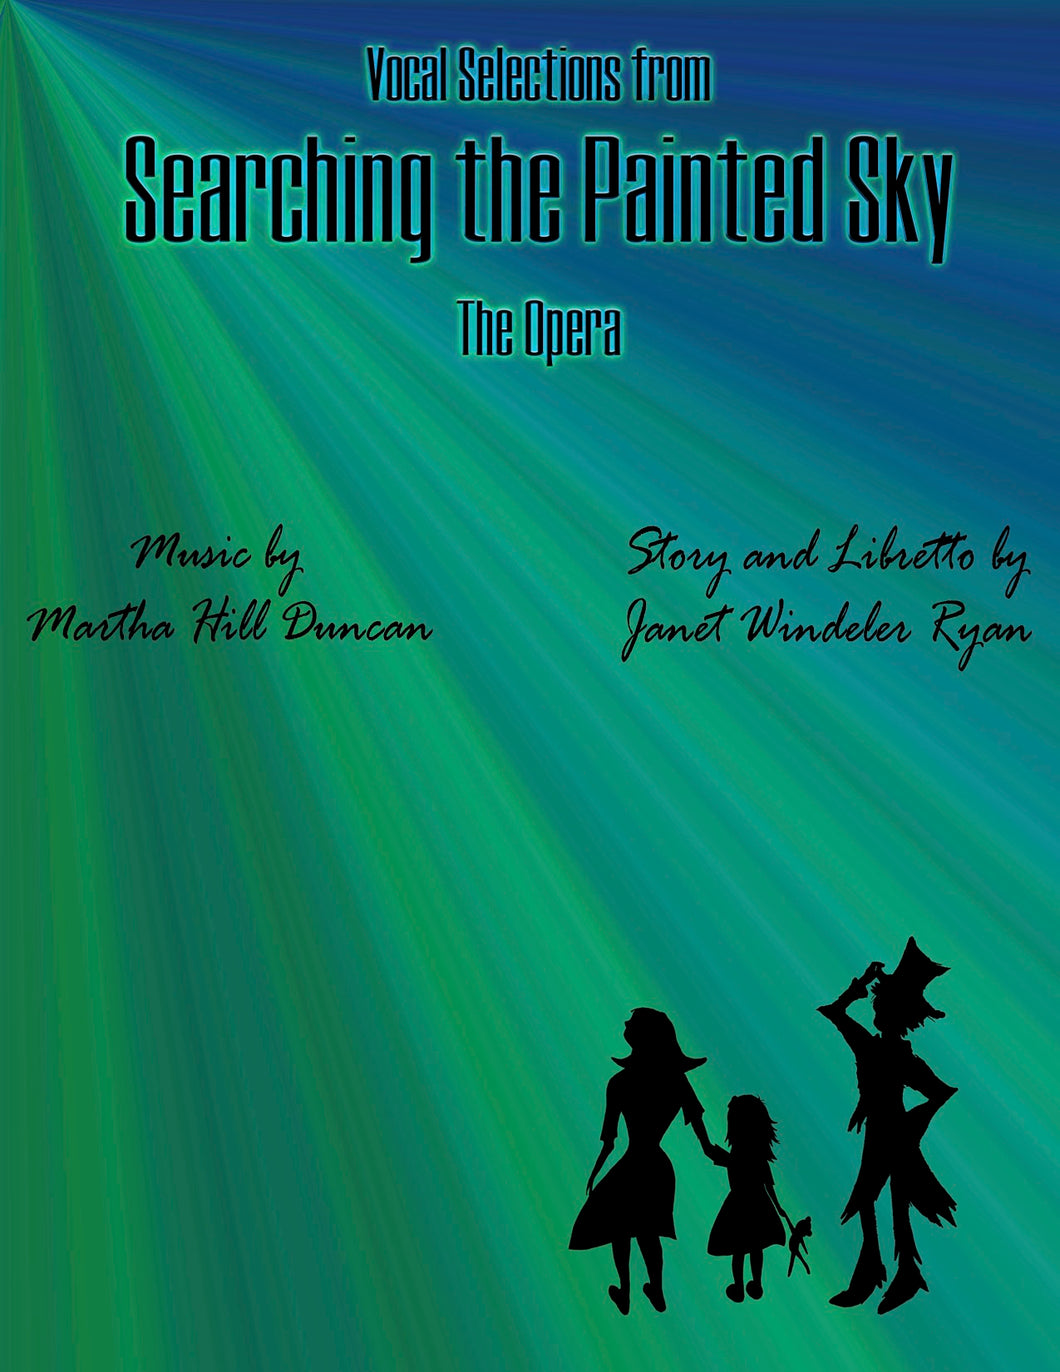 WORKING HARD - Voice & Piano from SEARCHING THE PAINTED SKY, THE OPERA